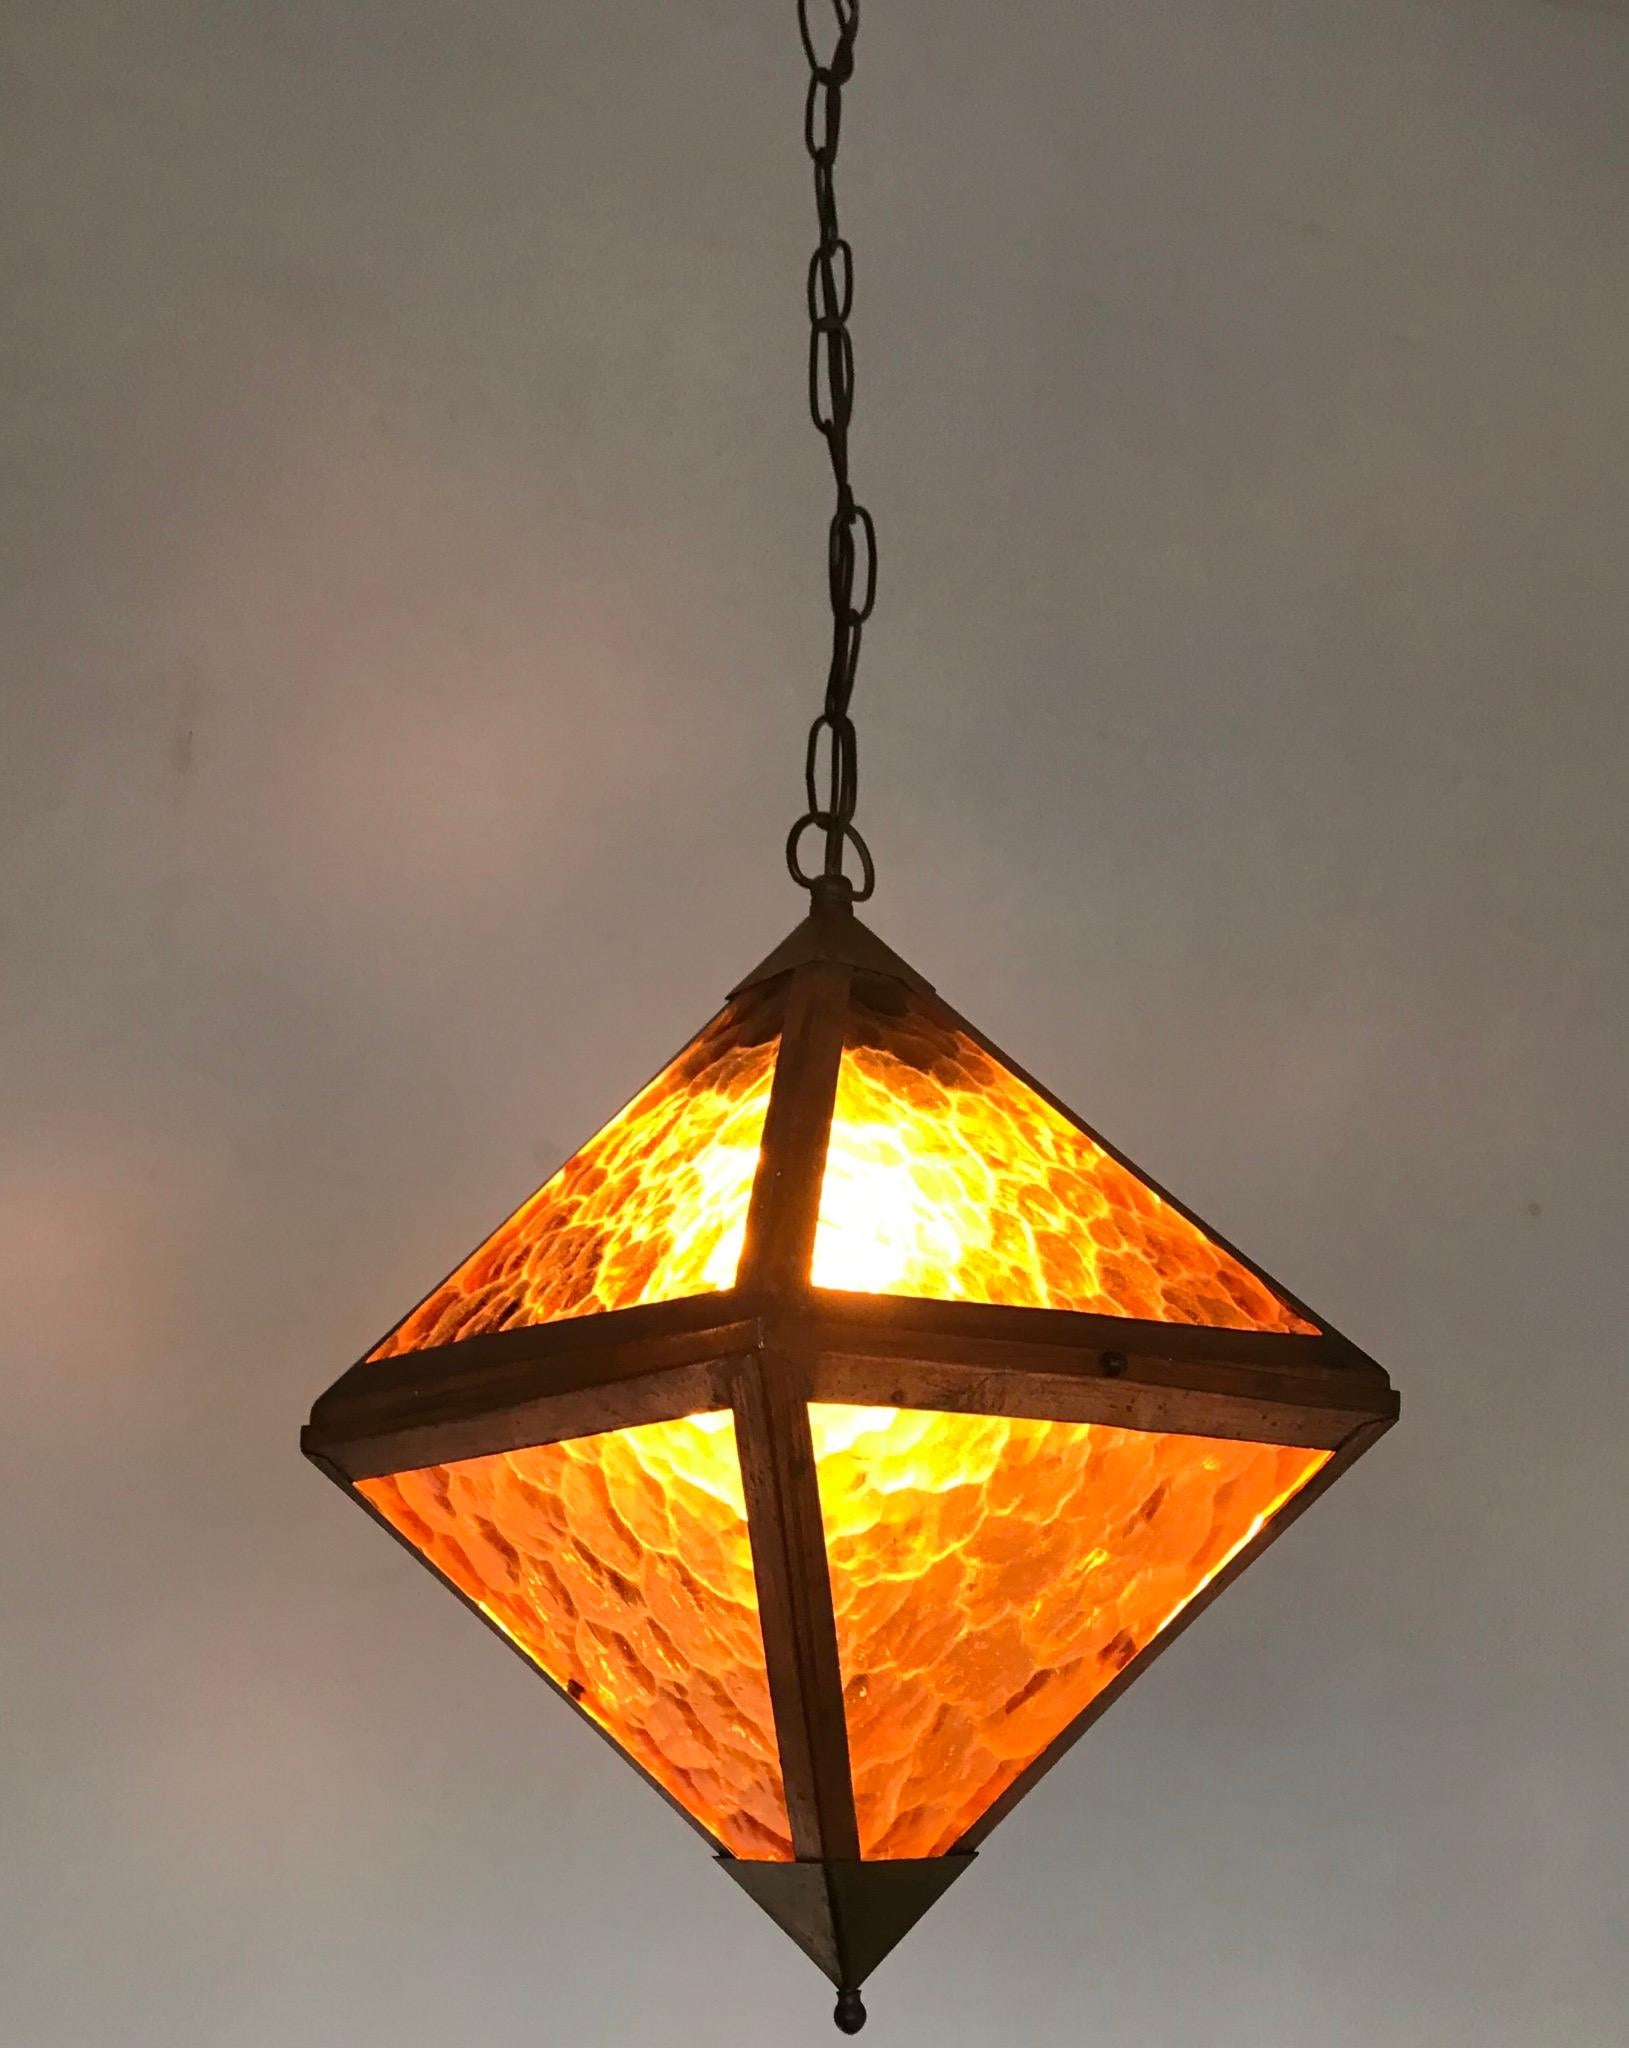 European Early 20th Century Arts & Crafts Copper and Glass Cube Shape Pendant Light Lamp